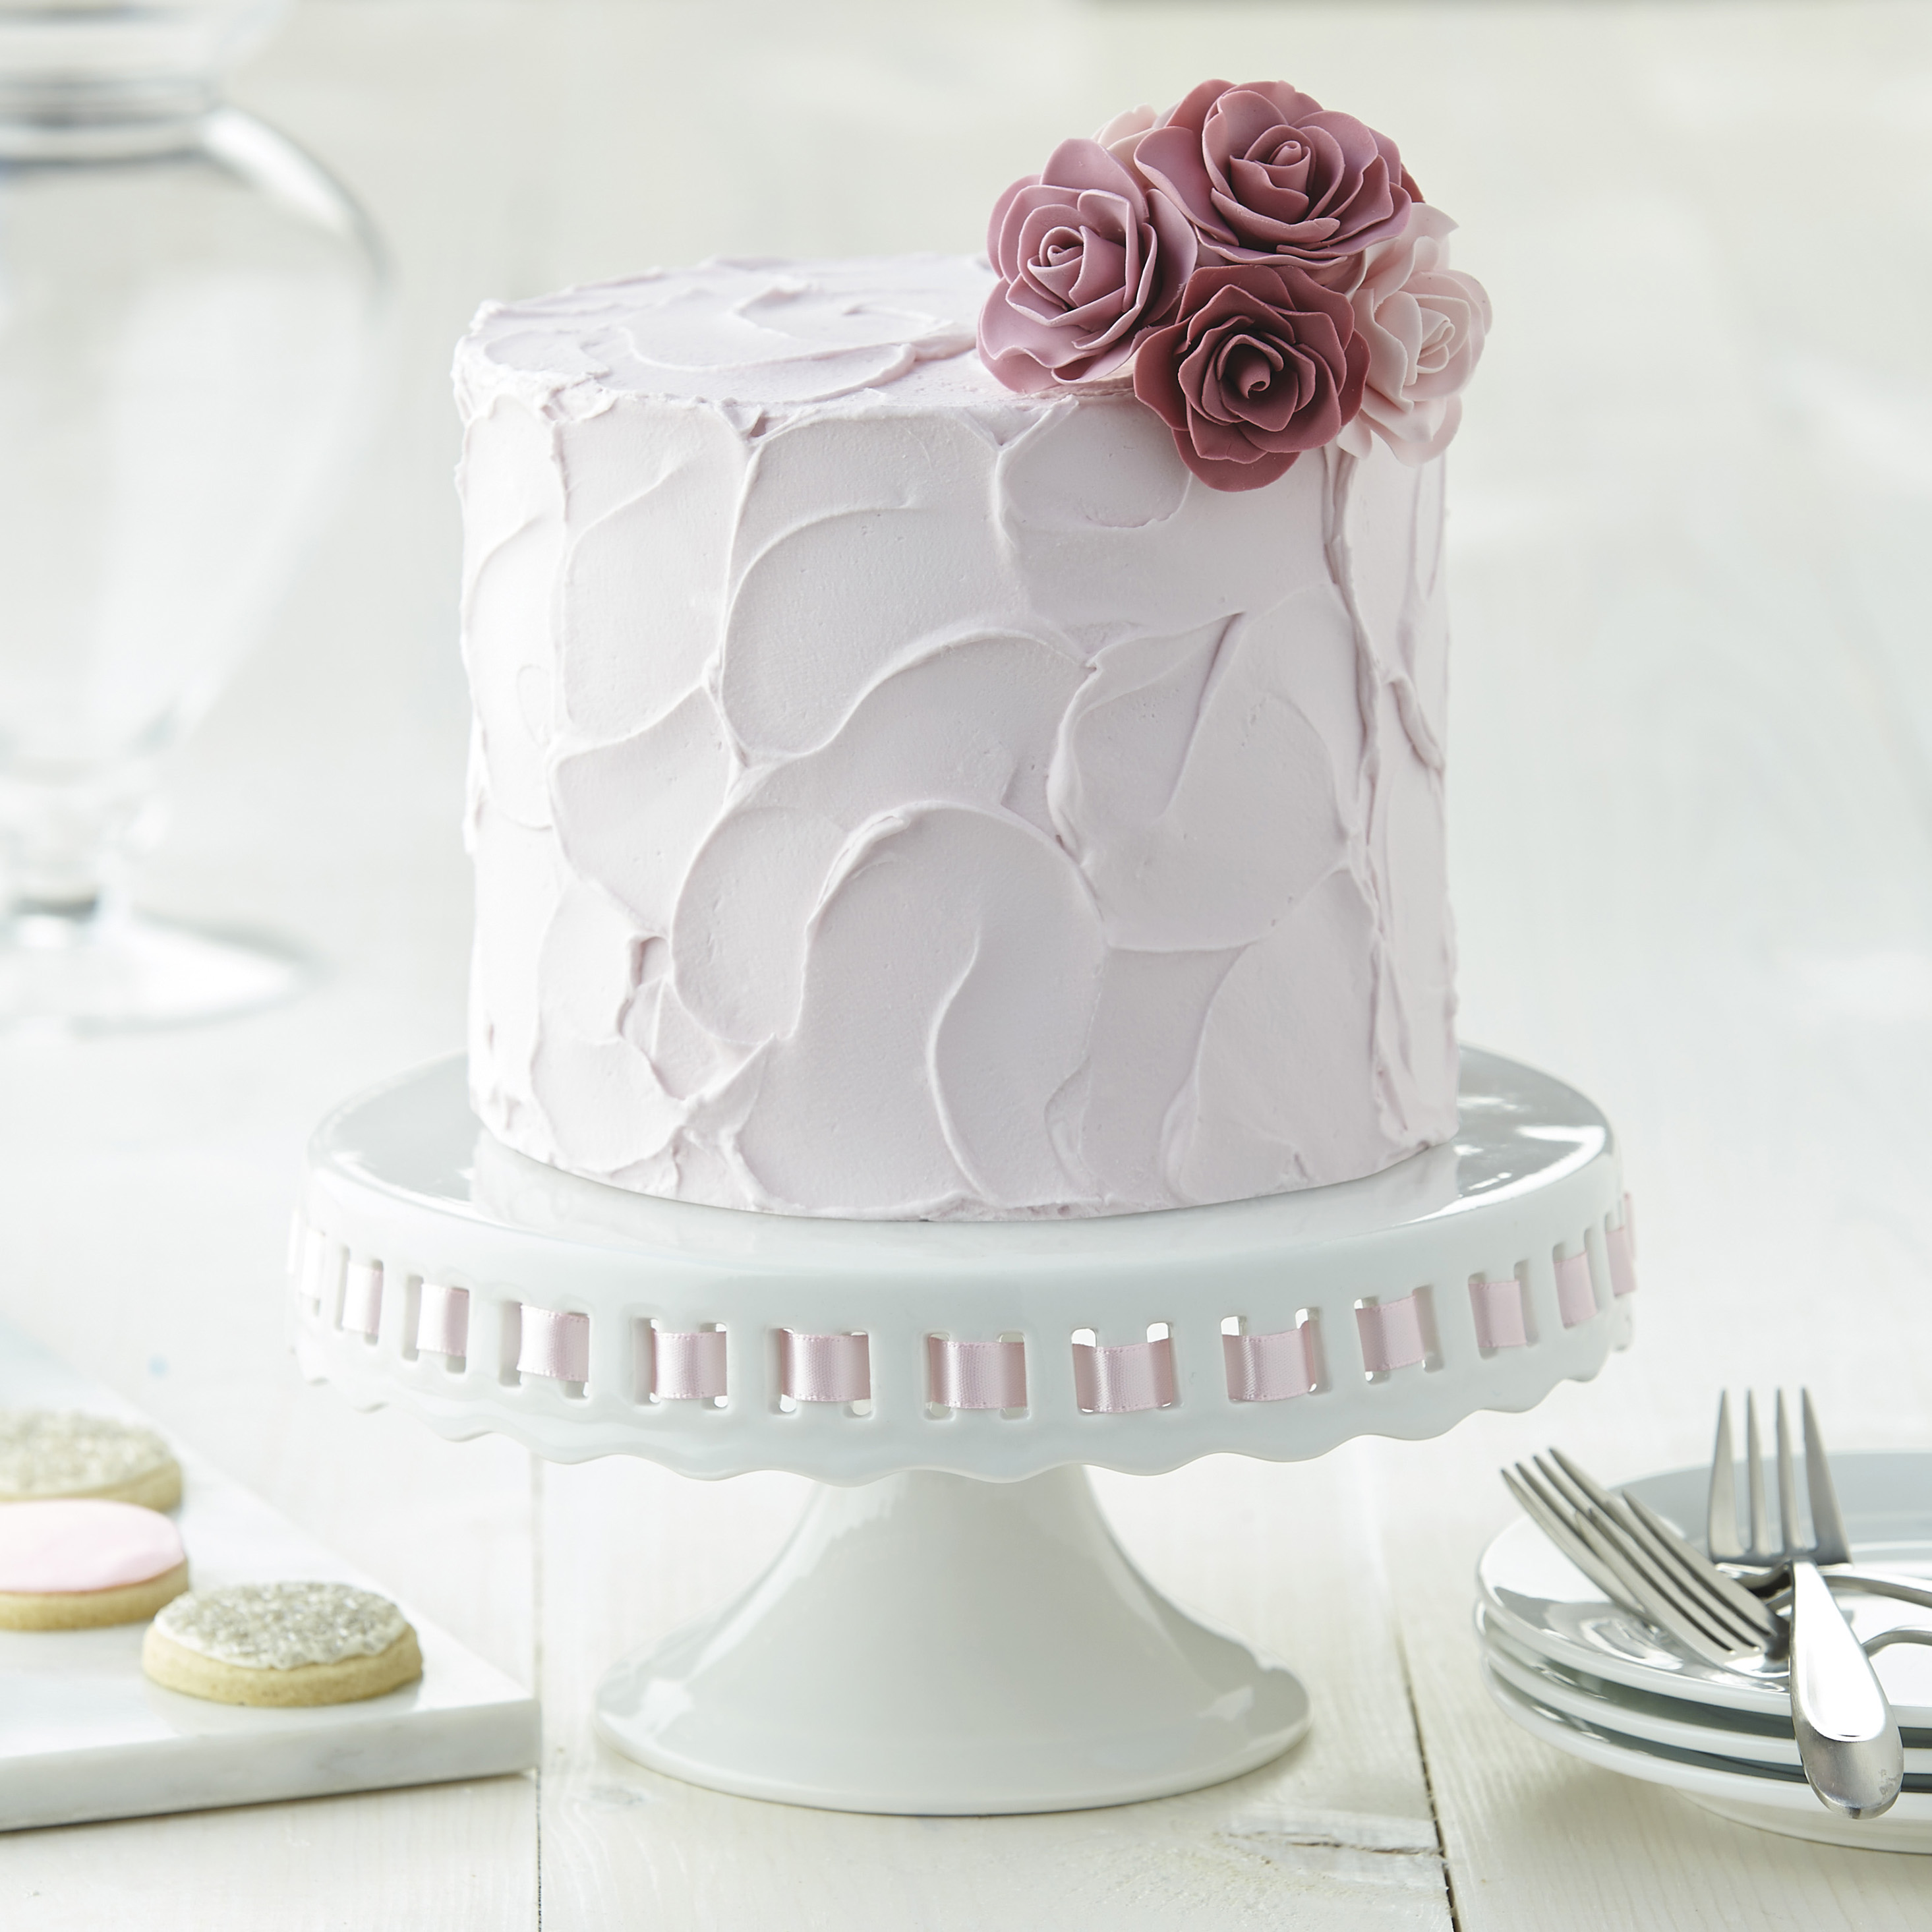 Learn to decorate a cake with a Wilton Method Class™